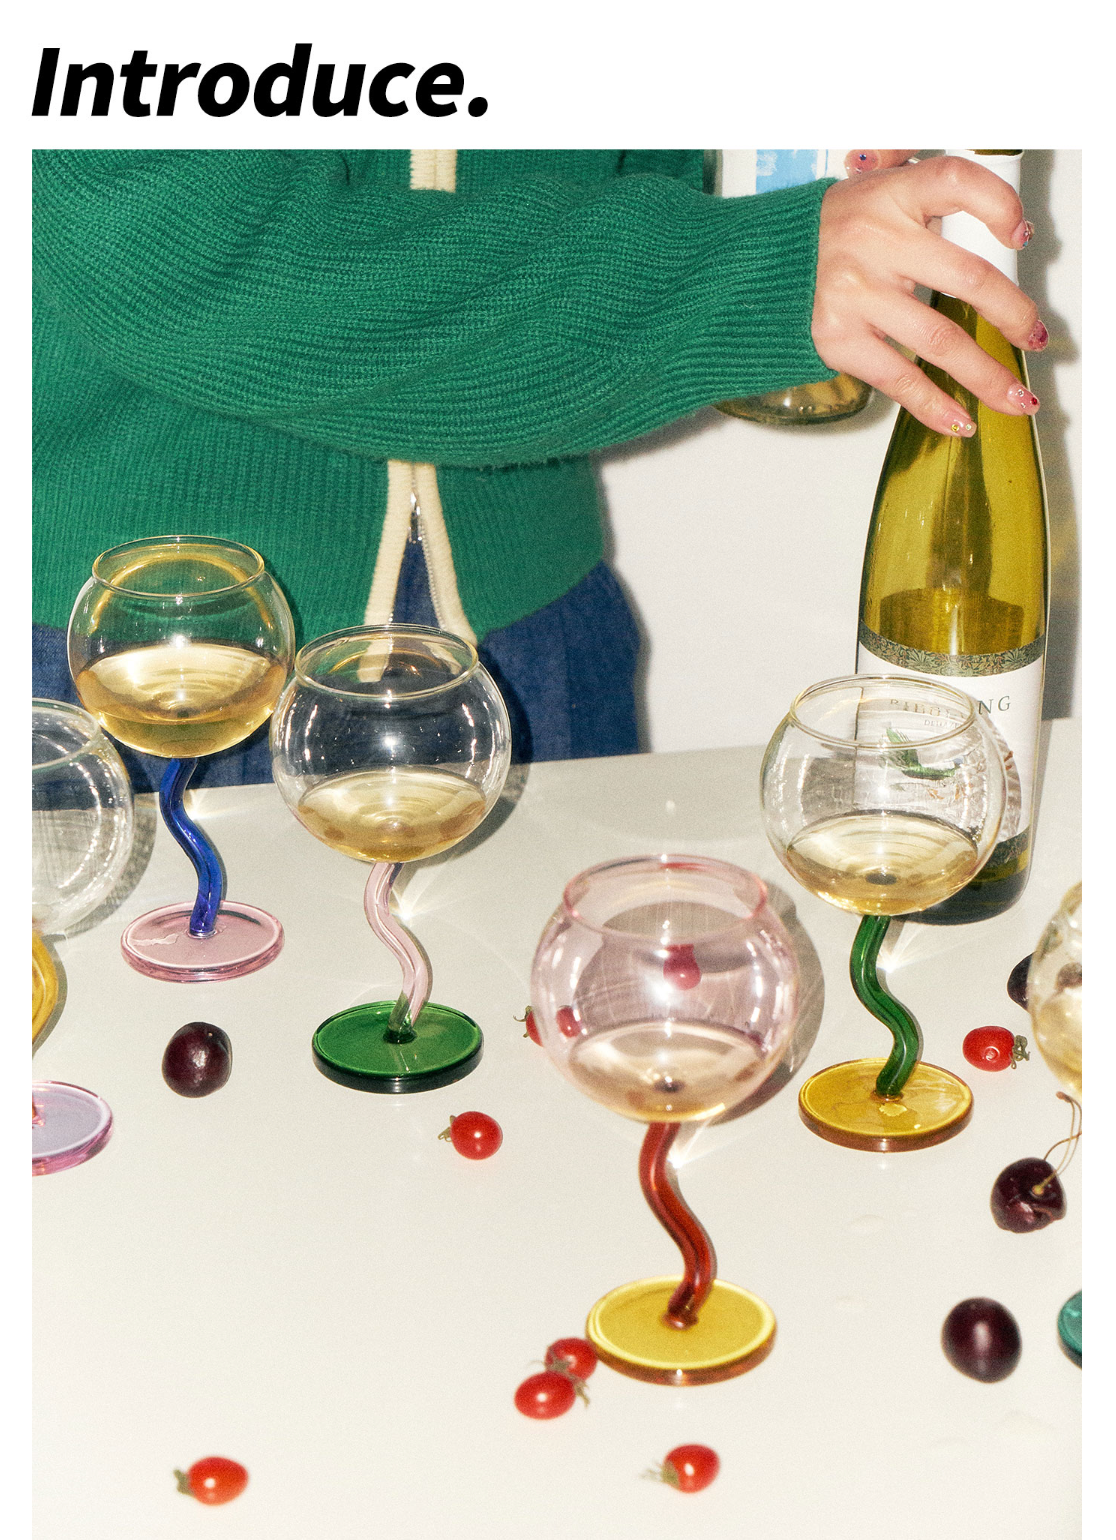 Colorful candy bubble style with spiral stem and the sense of party wine glass goblet, by A Bit Sleepy homeware concept store